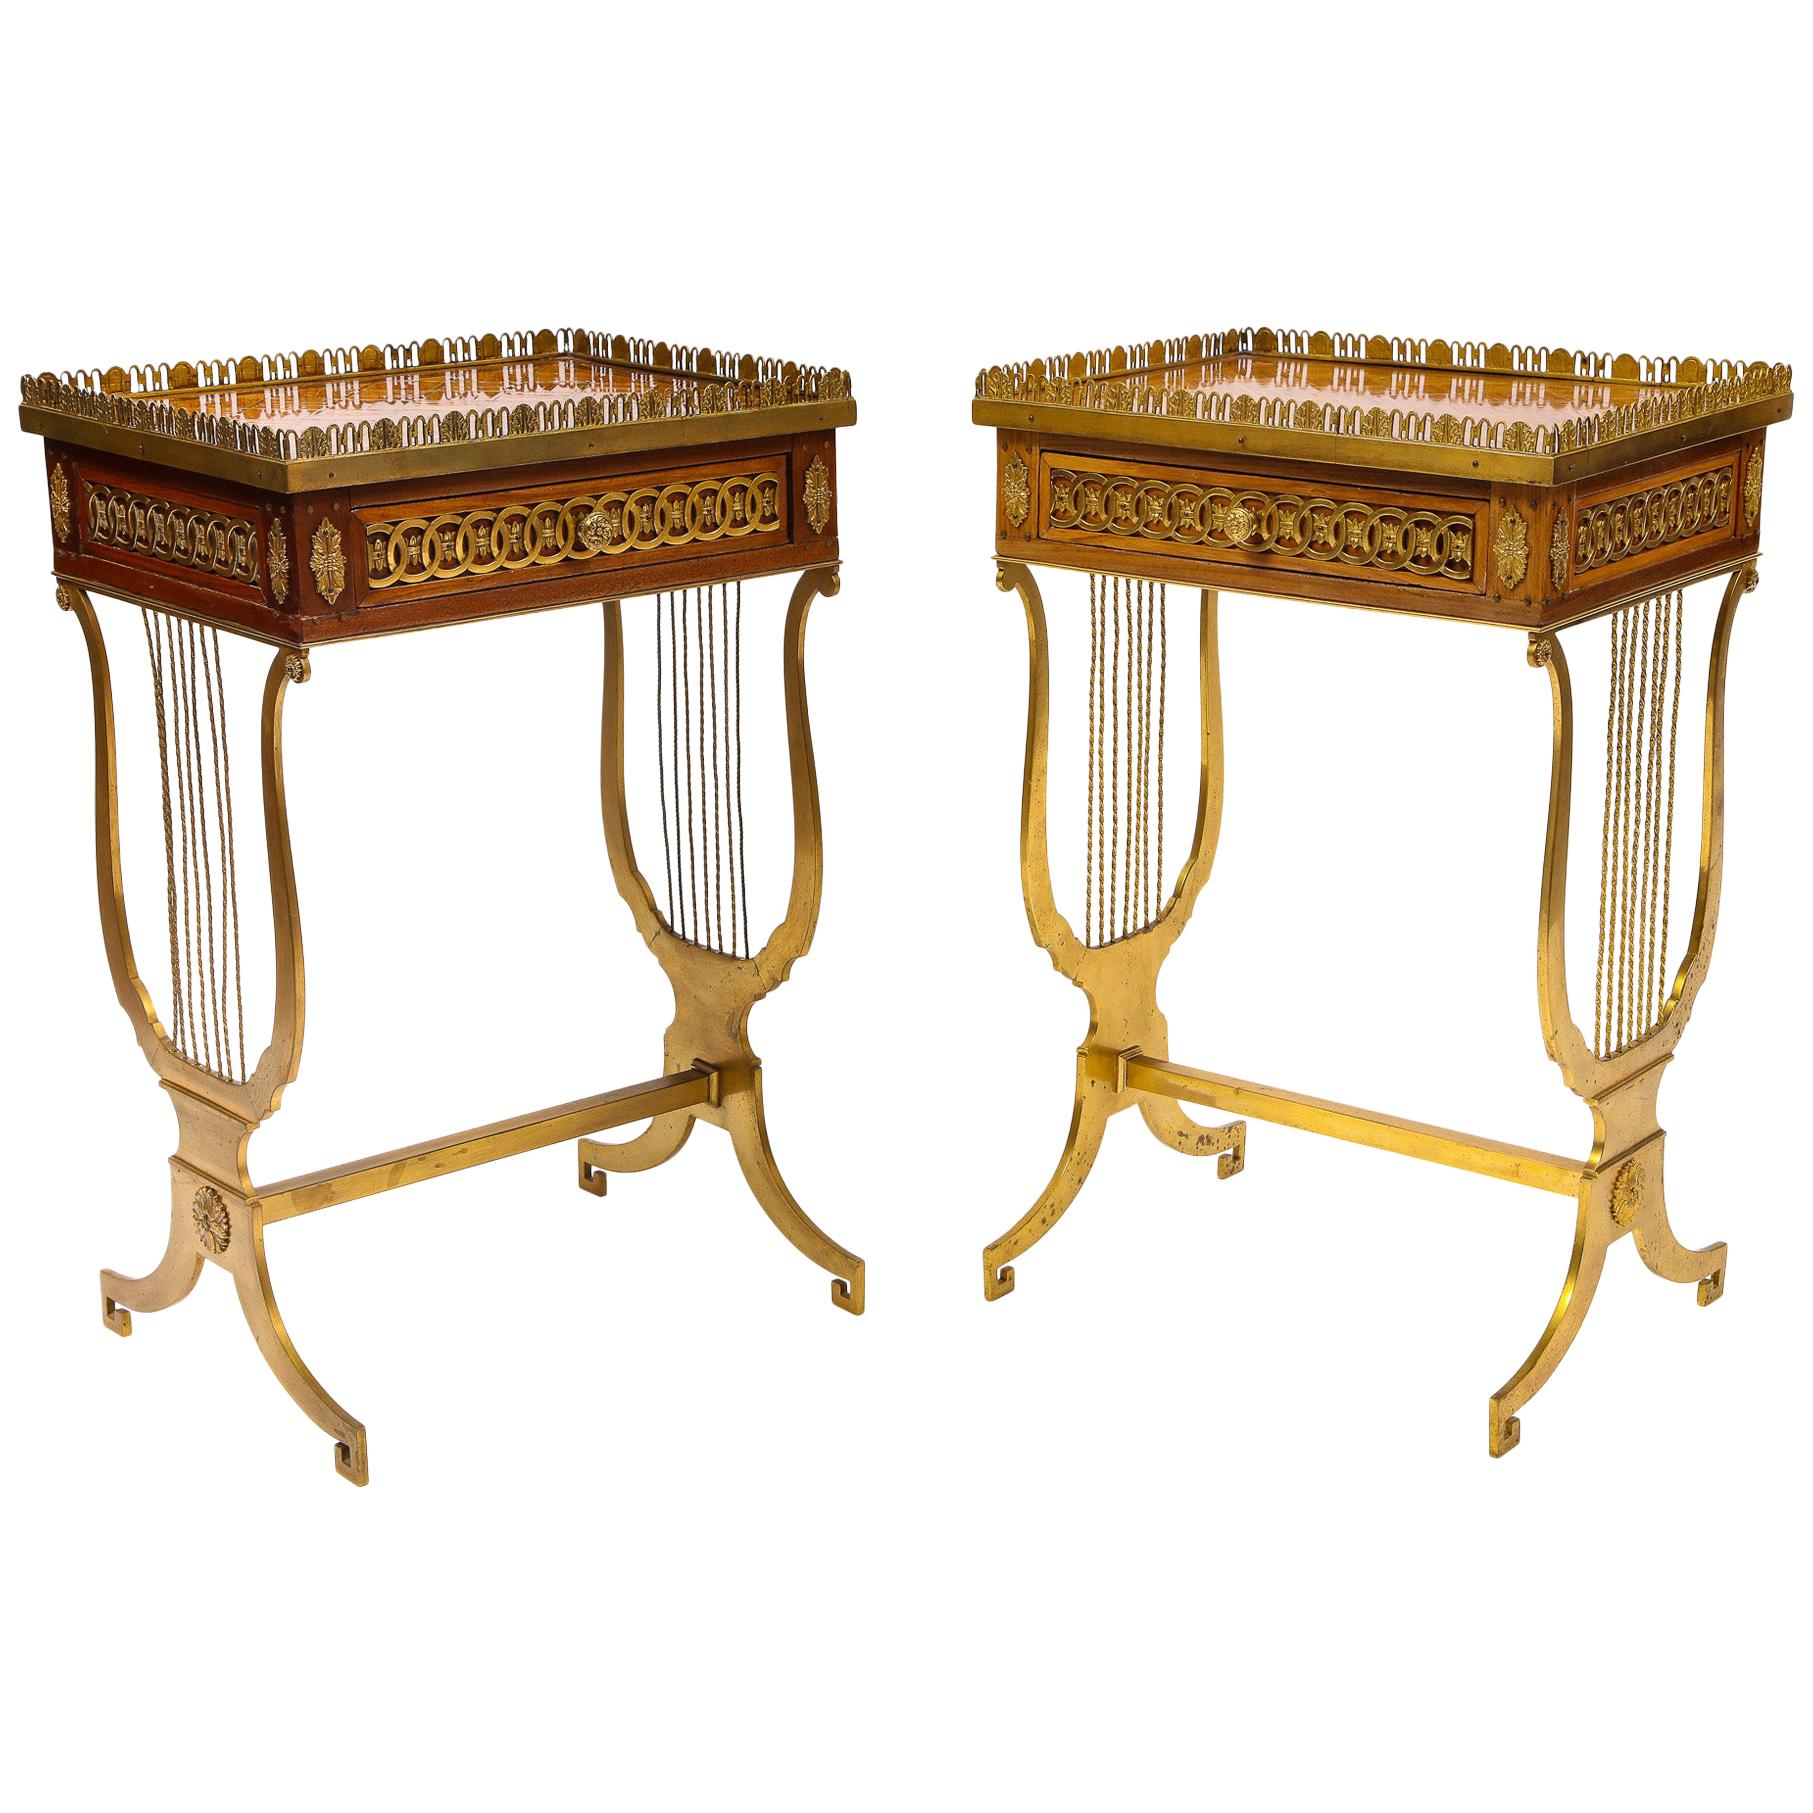 Pair of French 19th Century Rectangular Shaped Side Tables with Bronze Lyre Legs